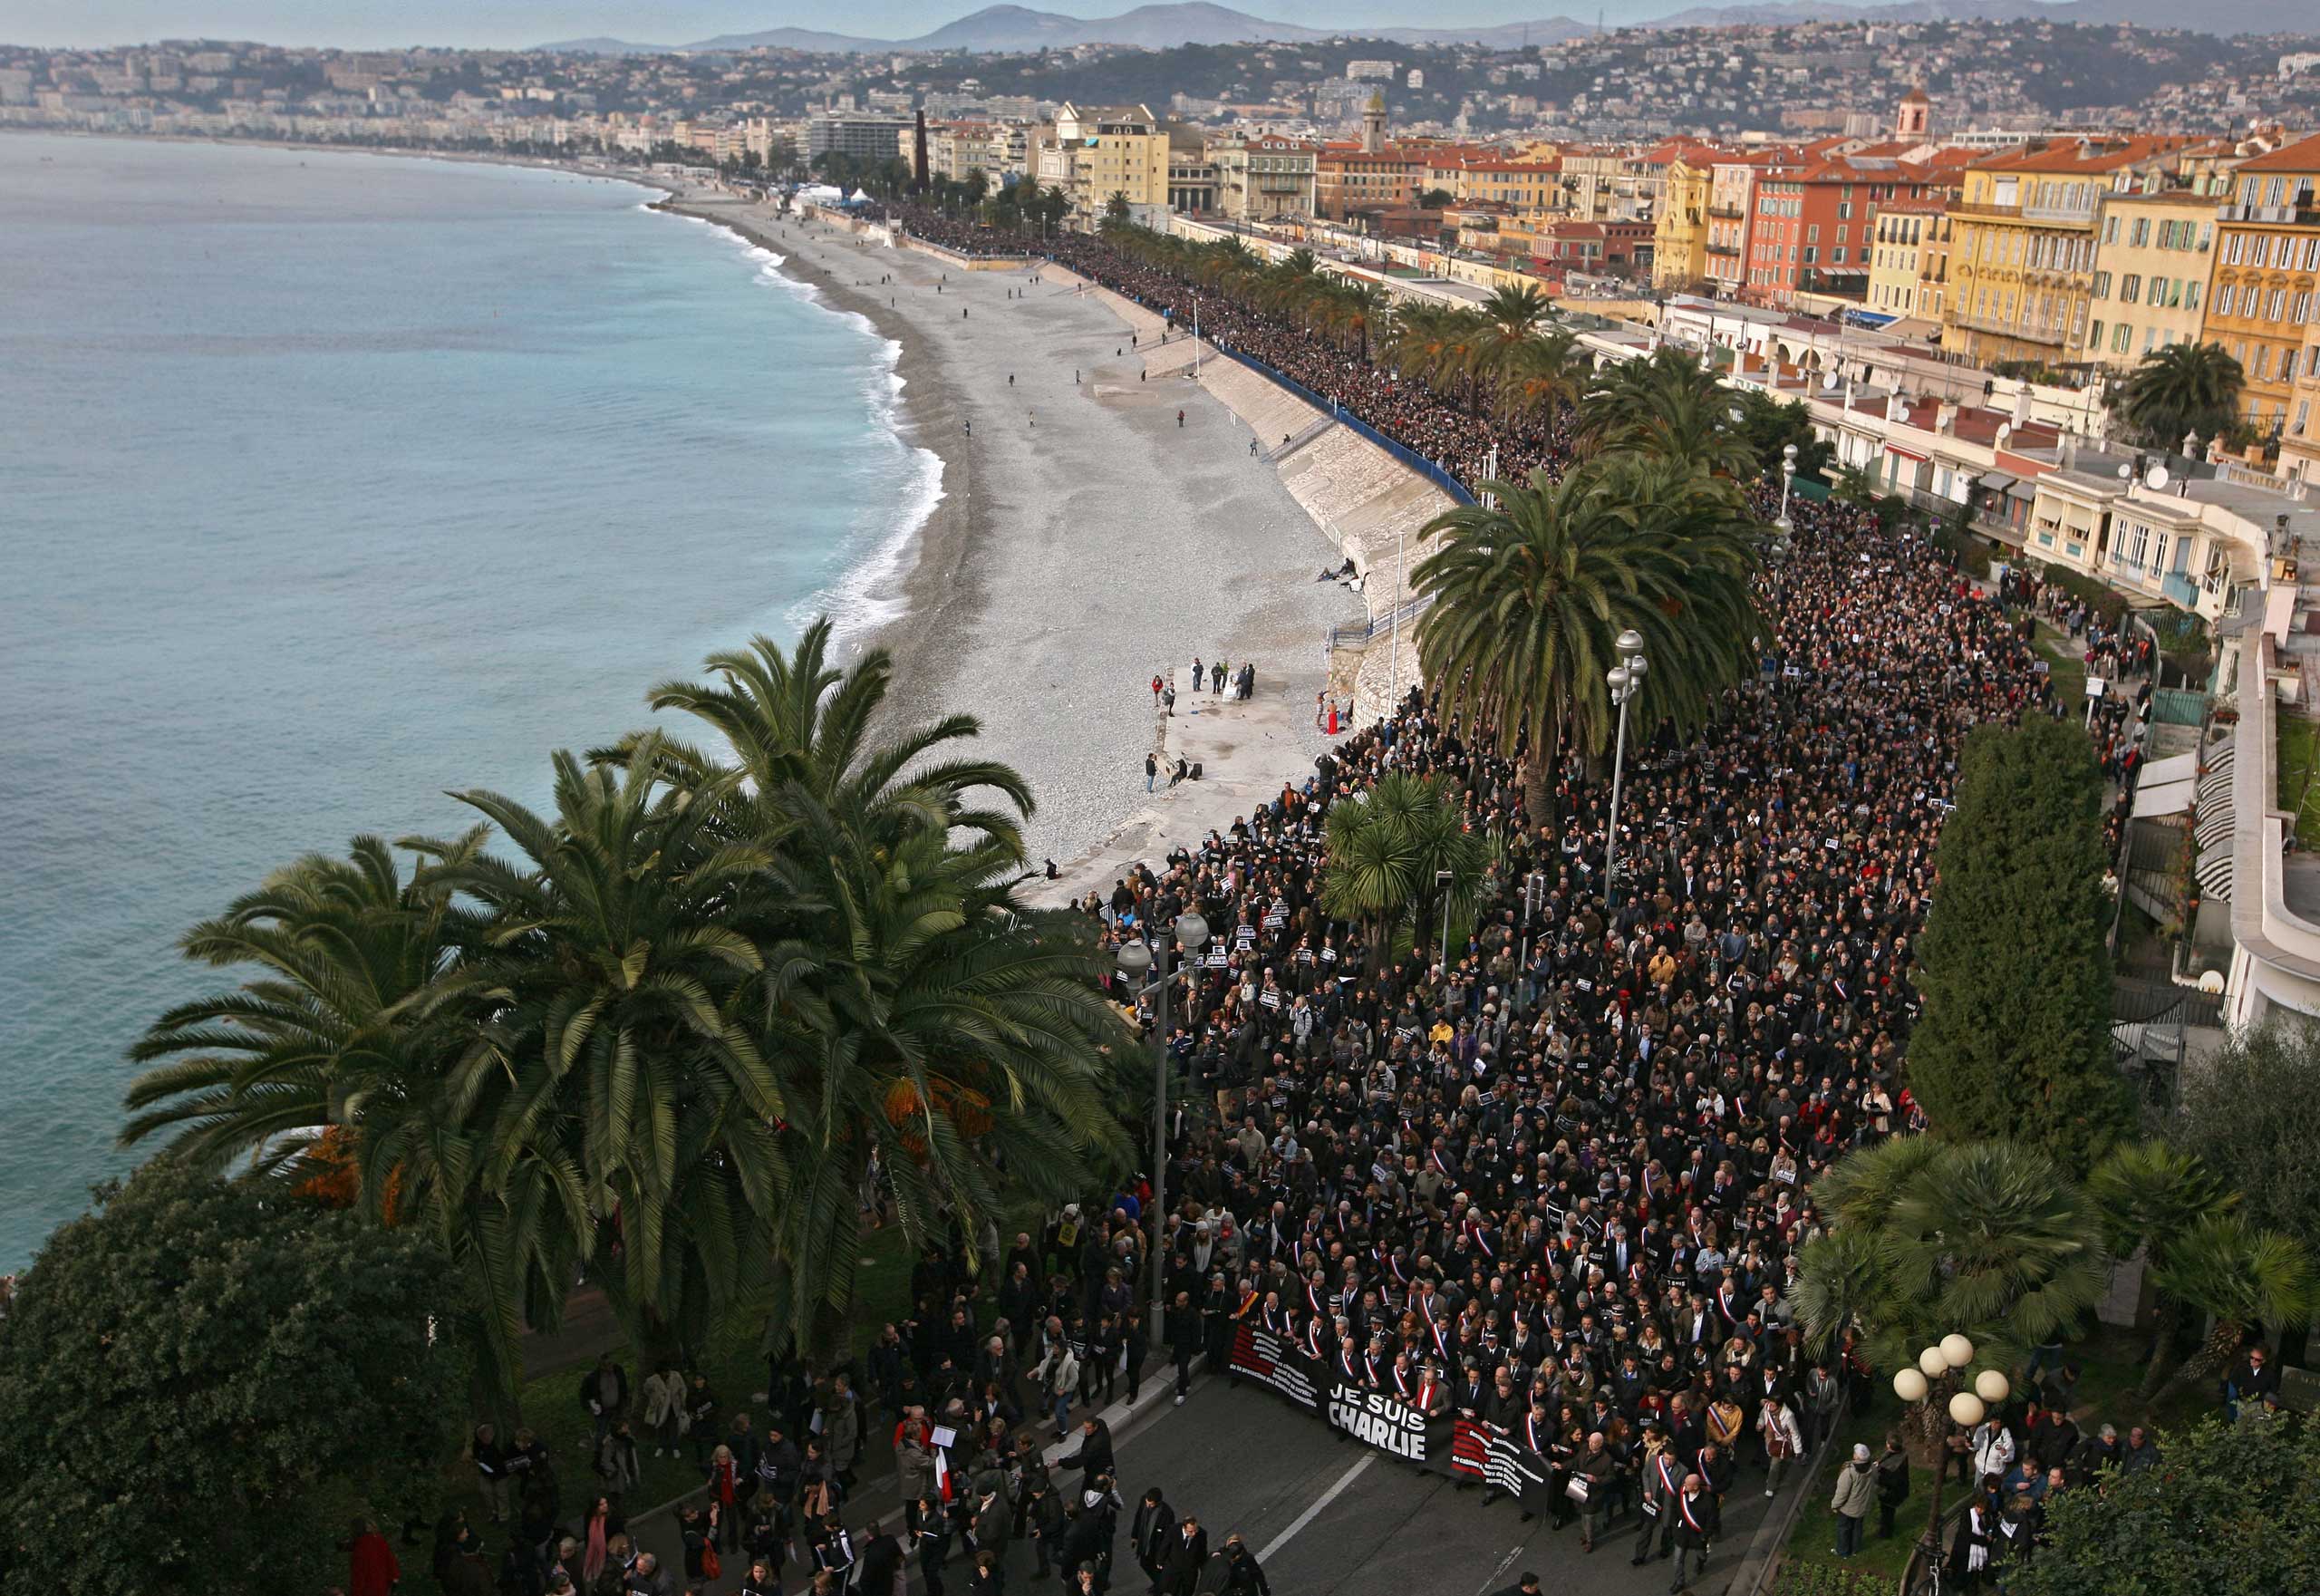 People take part in a silent procession for victims of the shooting at the satirical newspaper Charlie Hebdo, Jan. 10, 2015, in Nice, southeastern France.